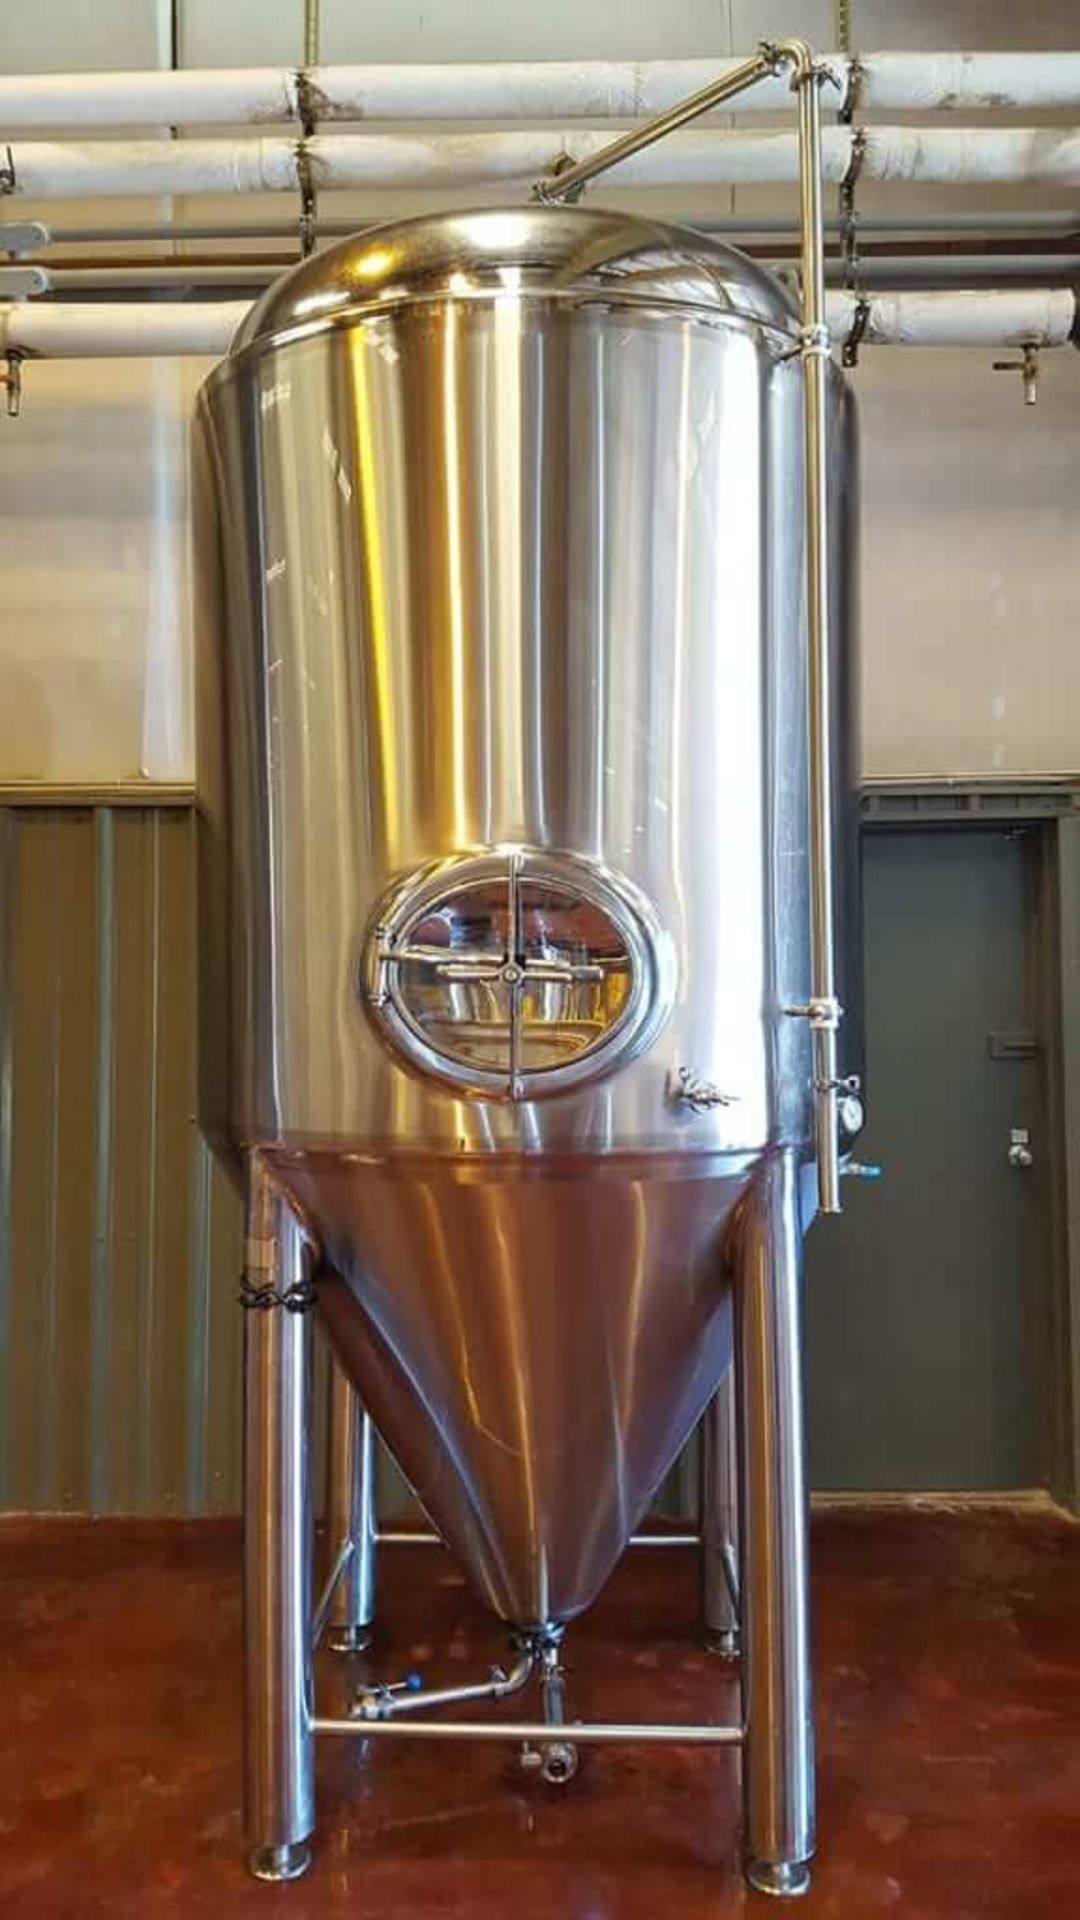 2013 Specific Mechanical 20 BBL Fermenter, Glycol Jacketed, Approx 5' - Subj to Bulk | Rig Fee $700 - Image 4 of 4